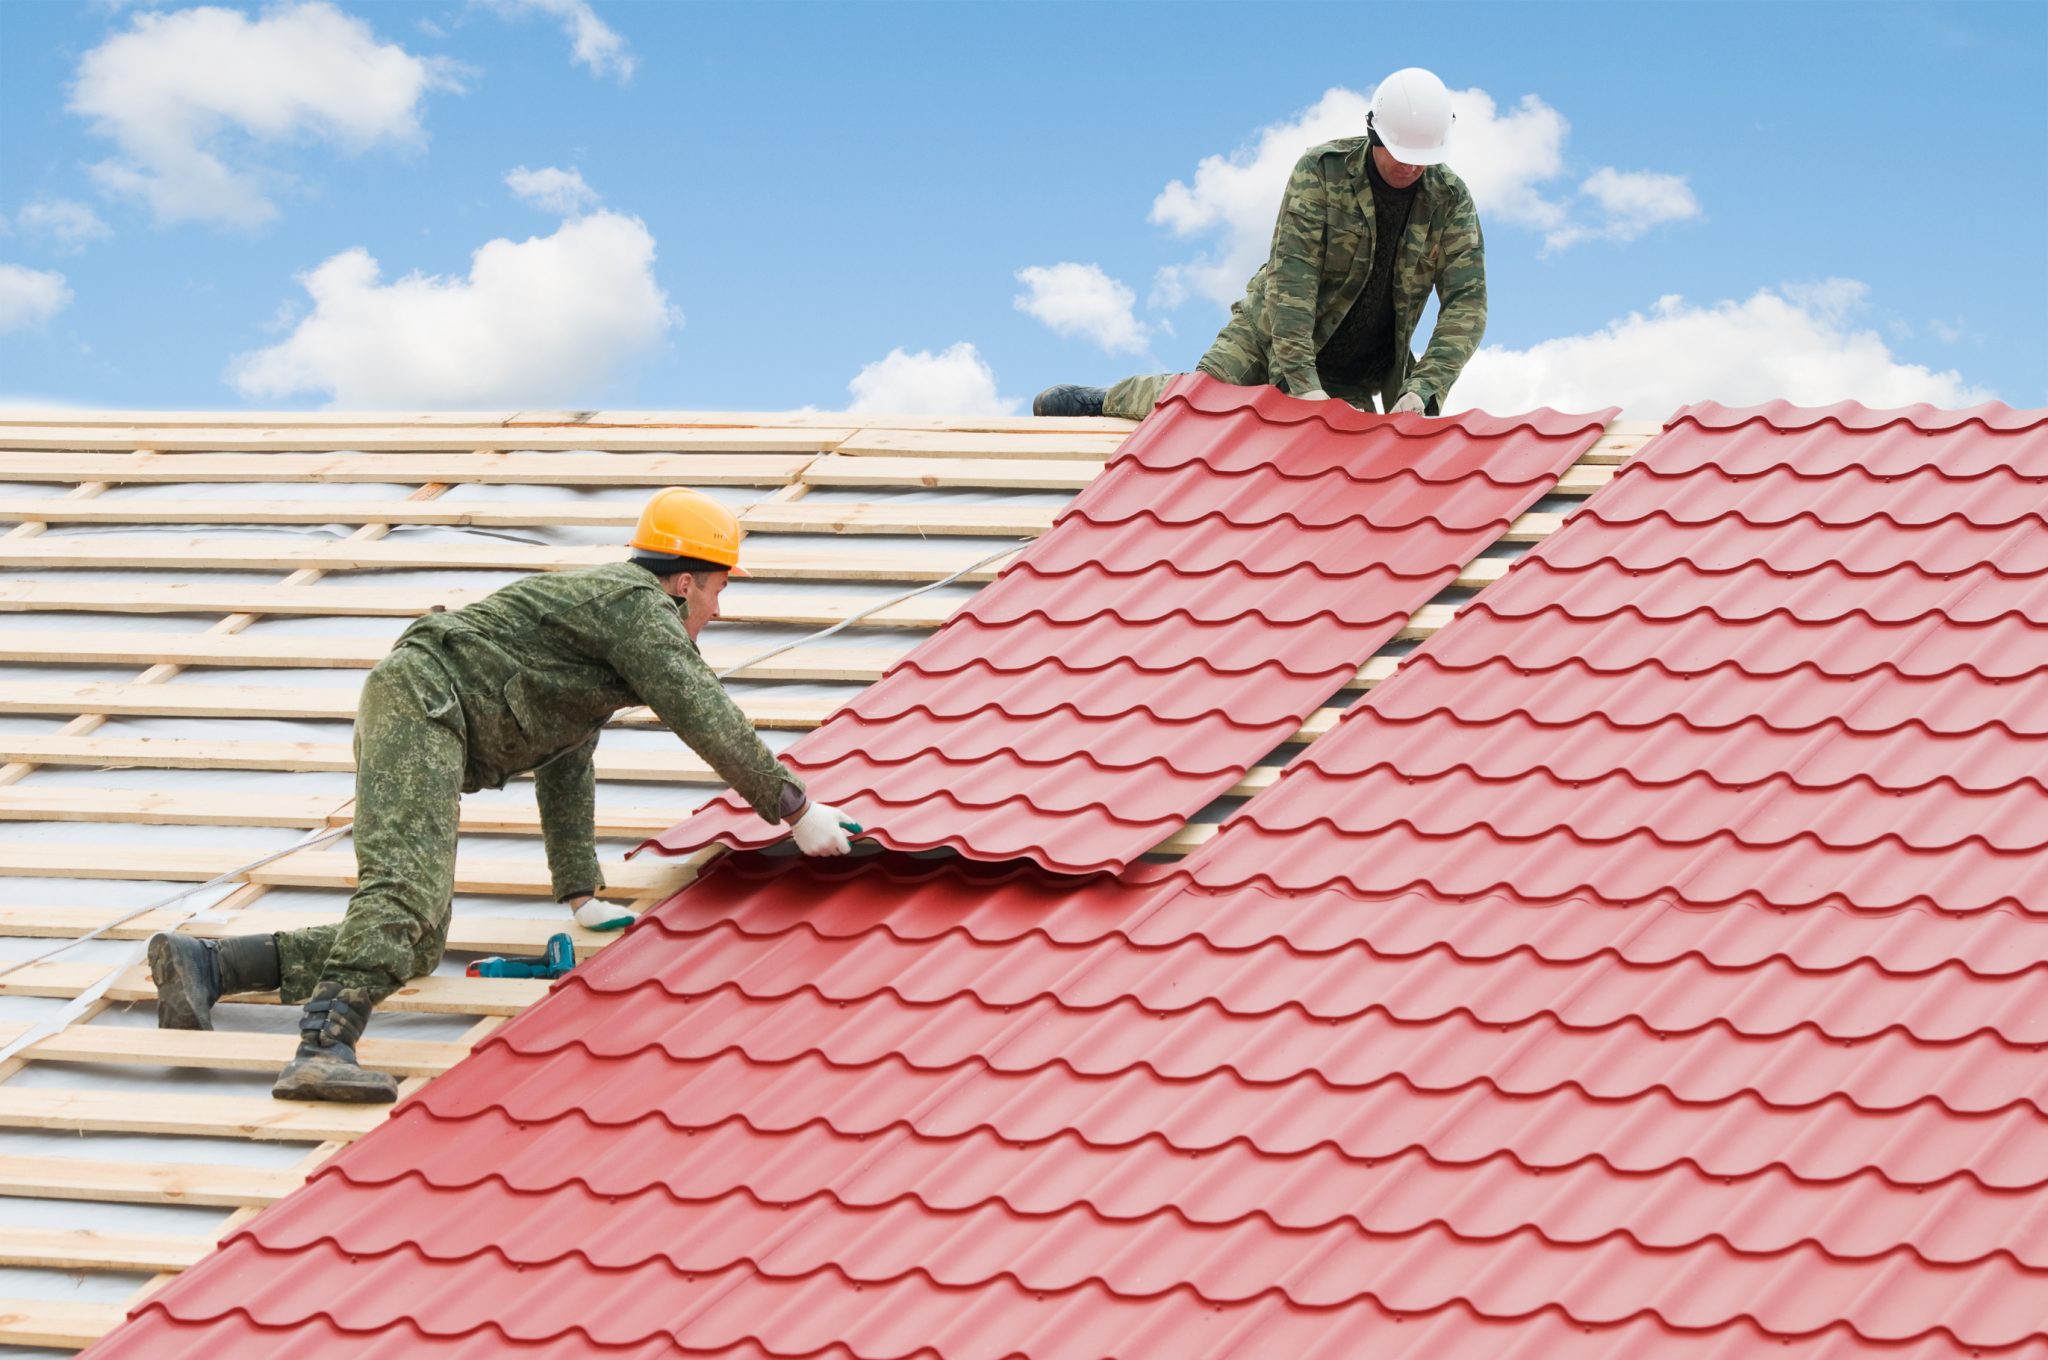  Roofing Option for Homeowners